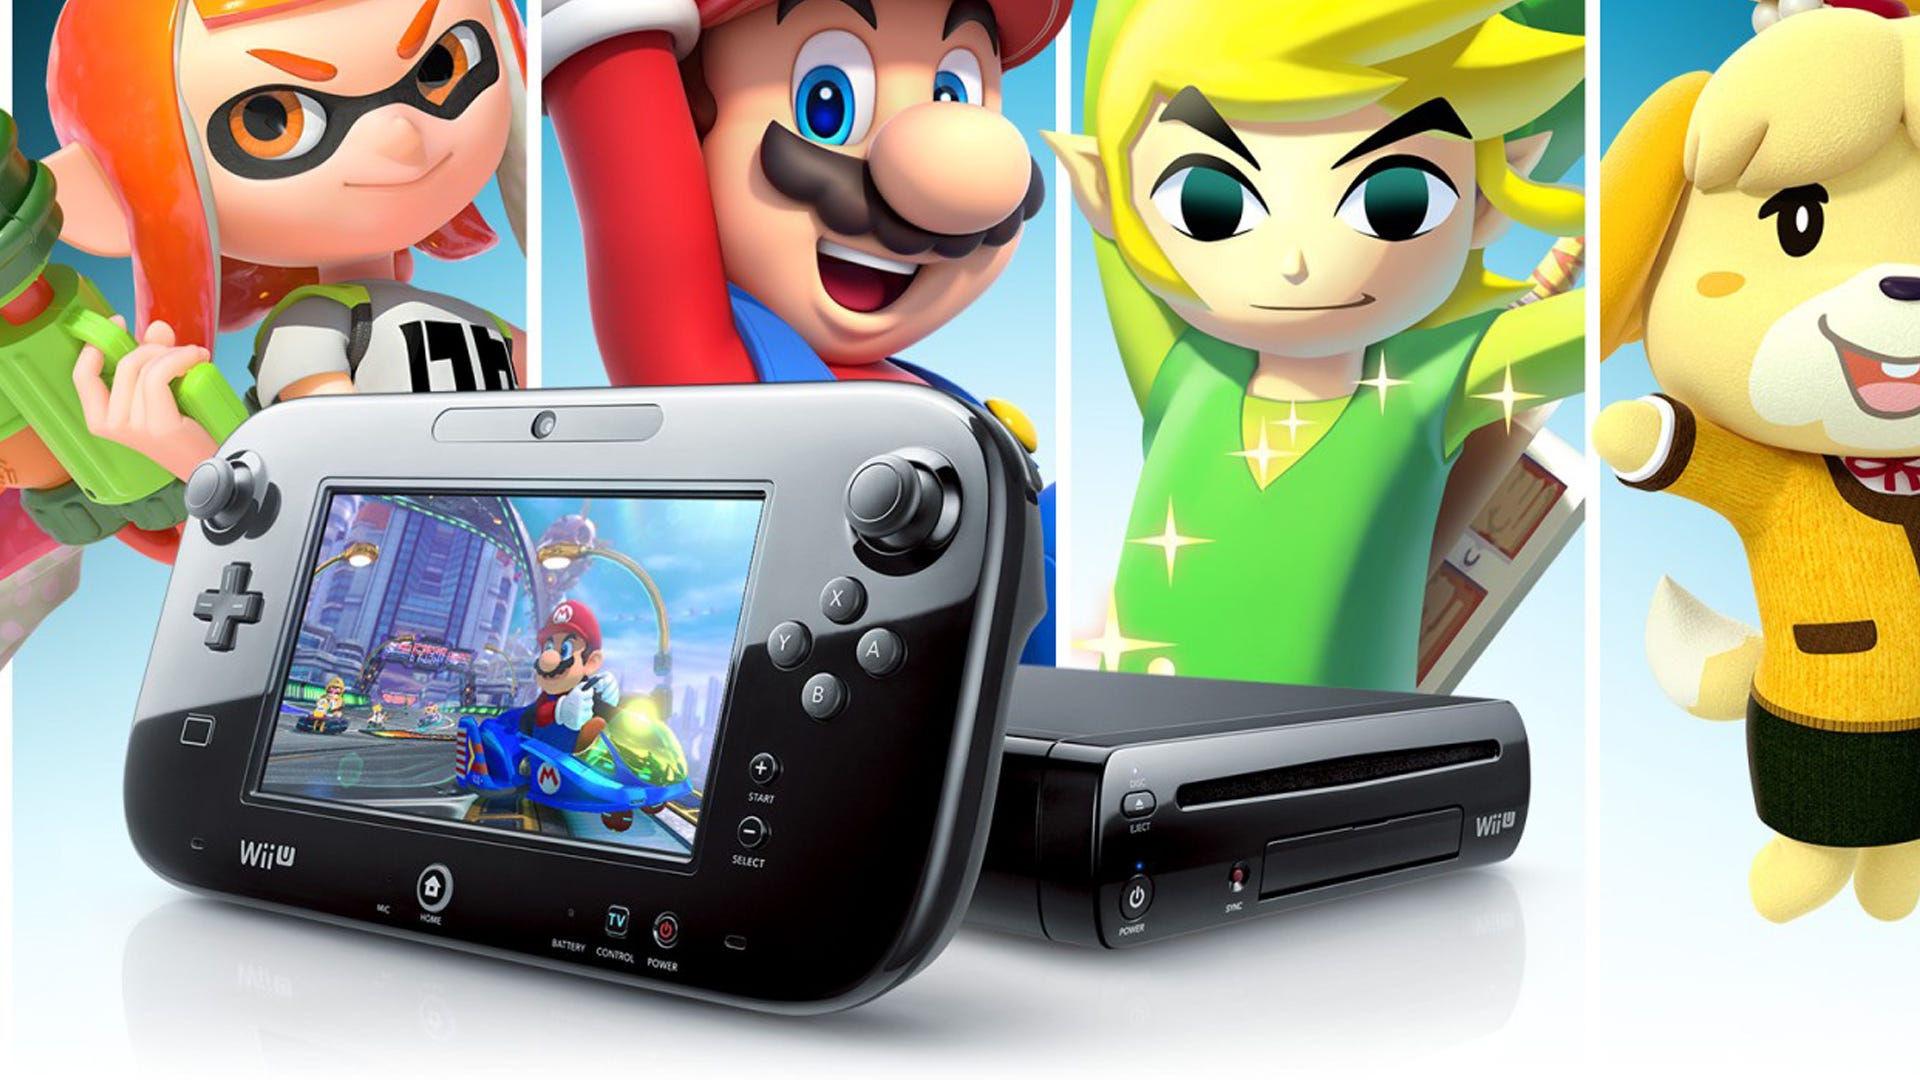 It might have been a bad console, but I'm still sad the Wii U is dying today